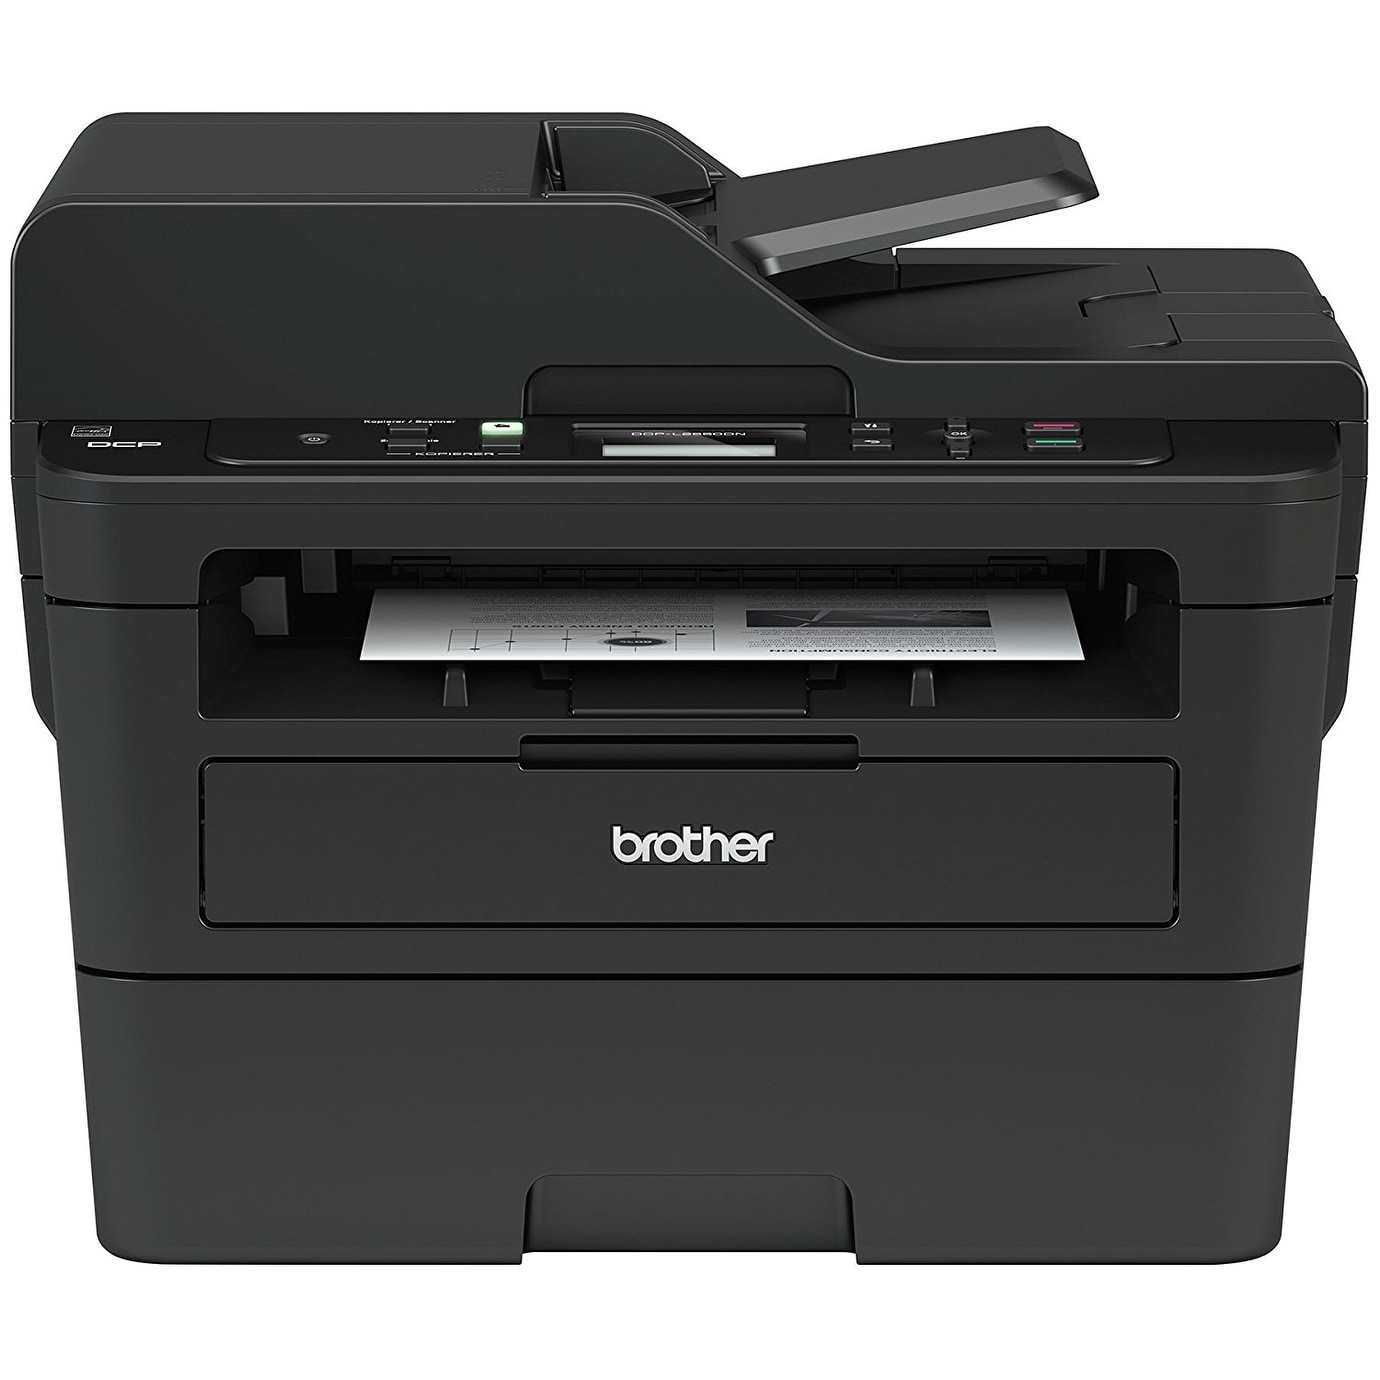 Brother Dcp-L2550dw Monochrome Laser Multi-Function Printer W/ Wireless Networking